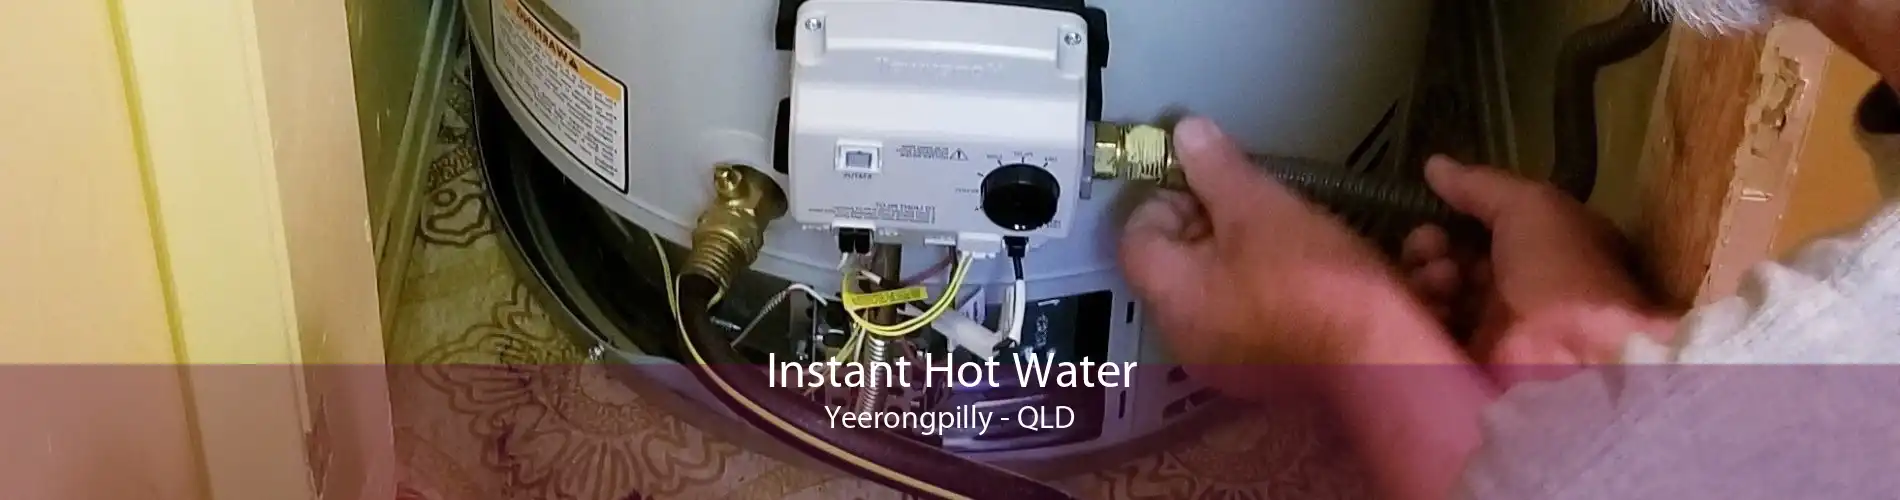 Instant Hot Water Yeerongpilly - QLD